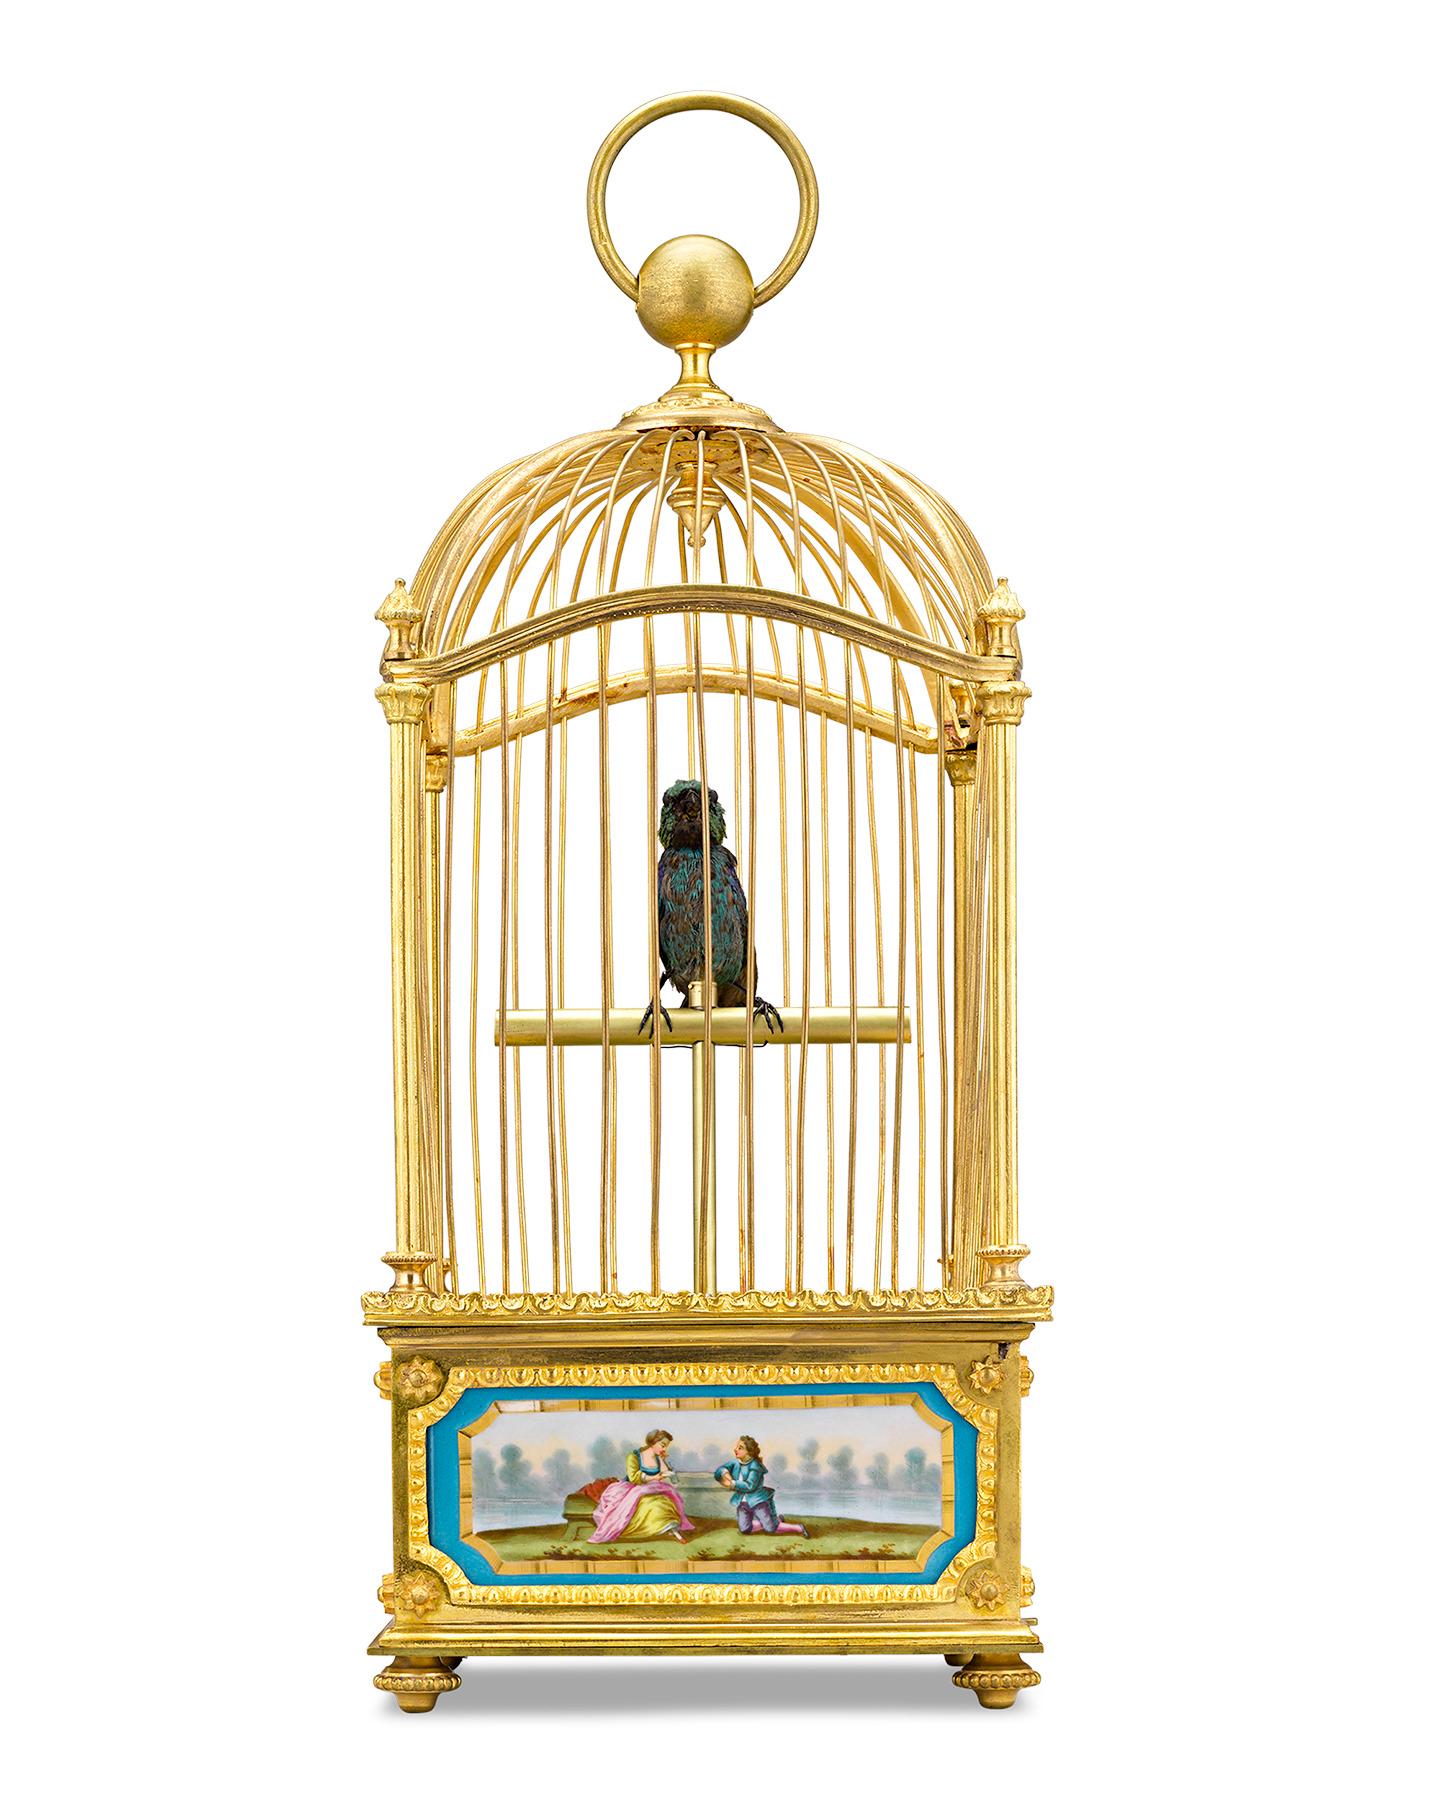 A mechanical bird sings in its gilded cage in this exceptionally rare French automaton. Combining outstanding artistry with mechanical genius, the gilt brass cage is mounted with hand painted Sèvres porcelain panels. A singing bird mechanism is